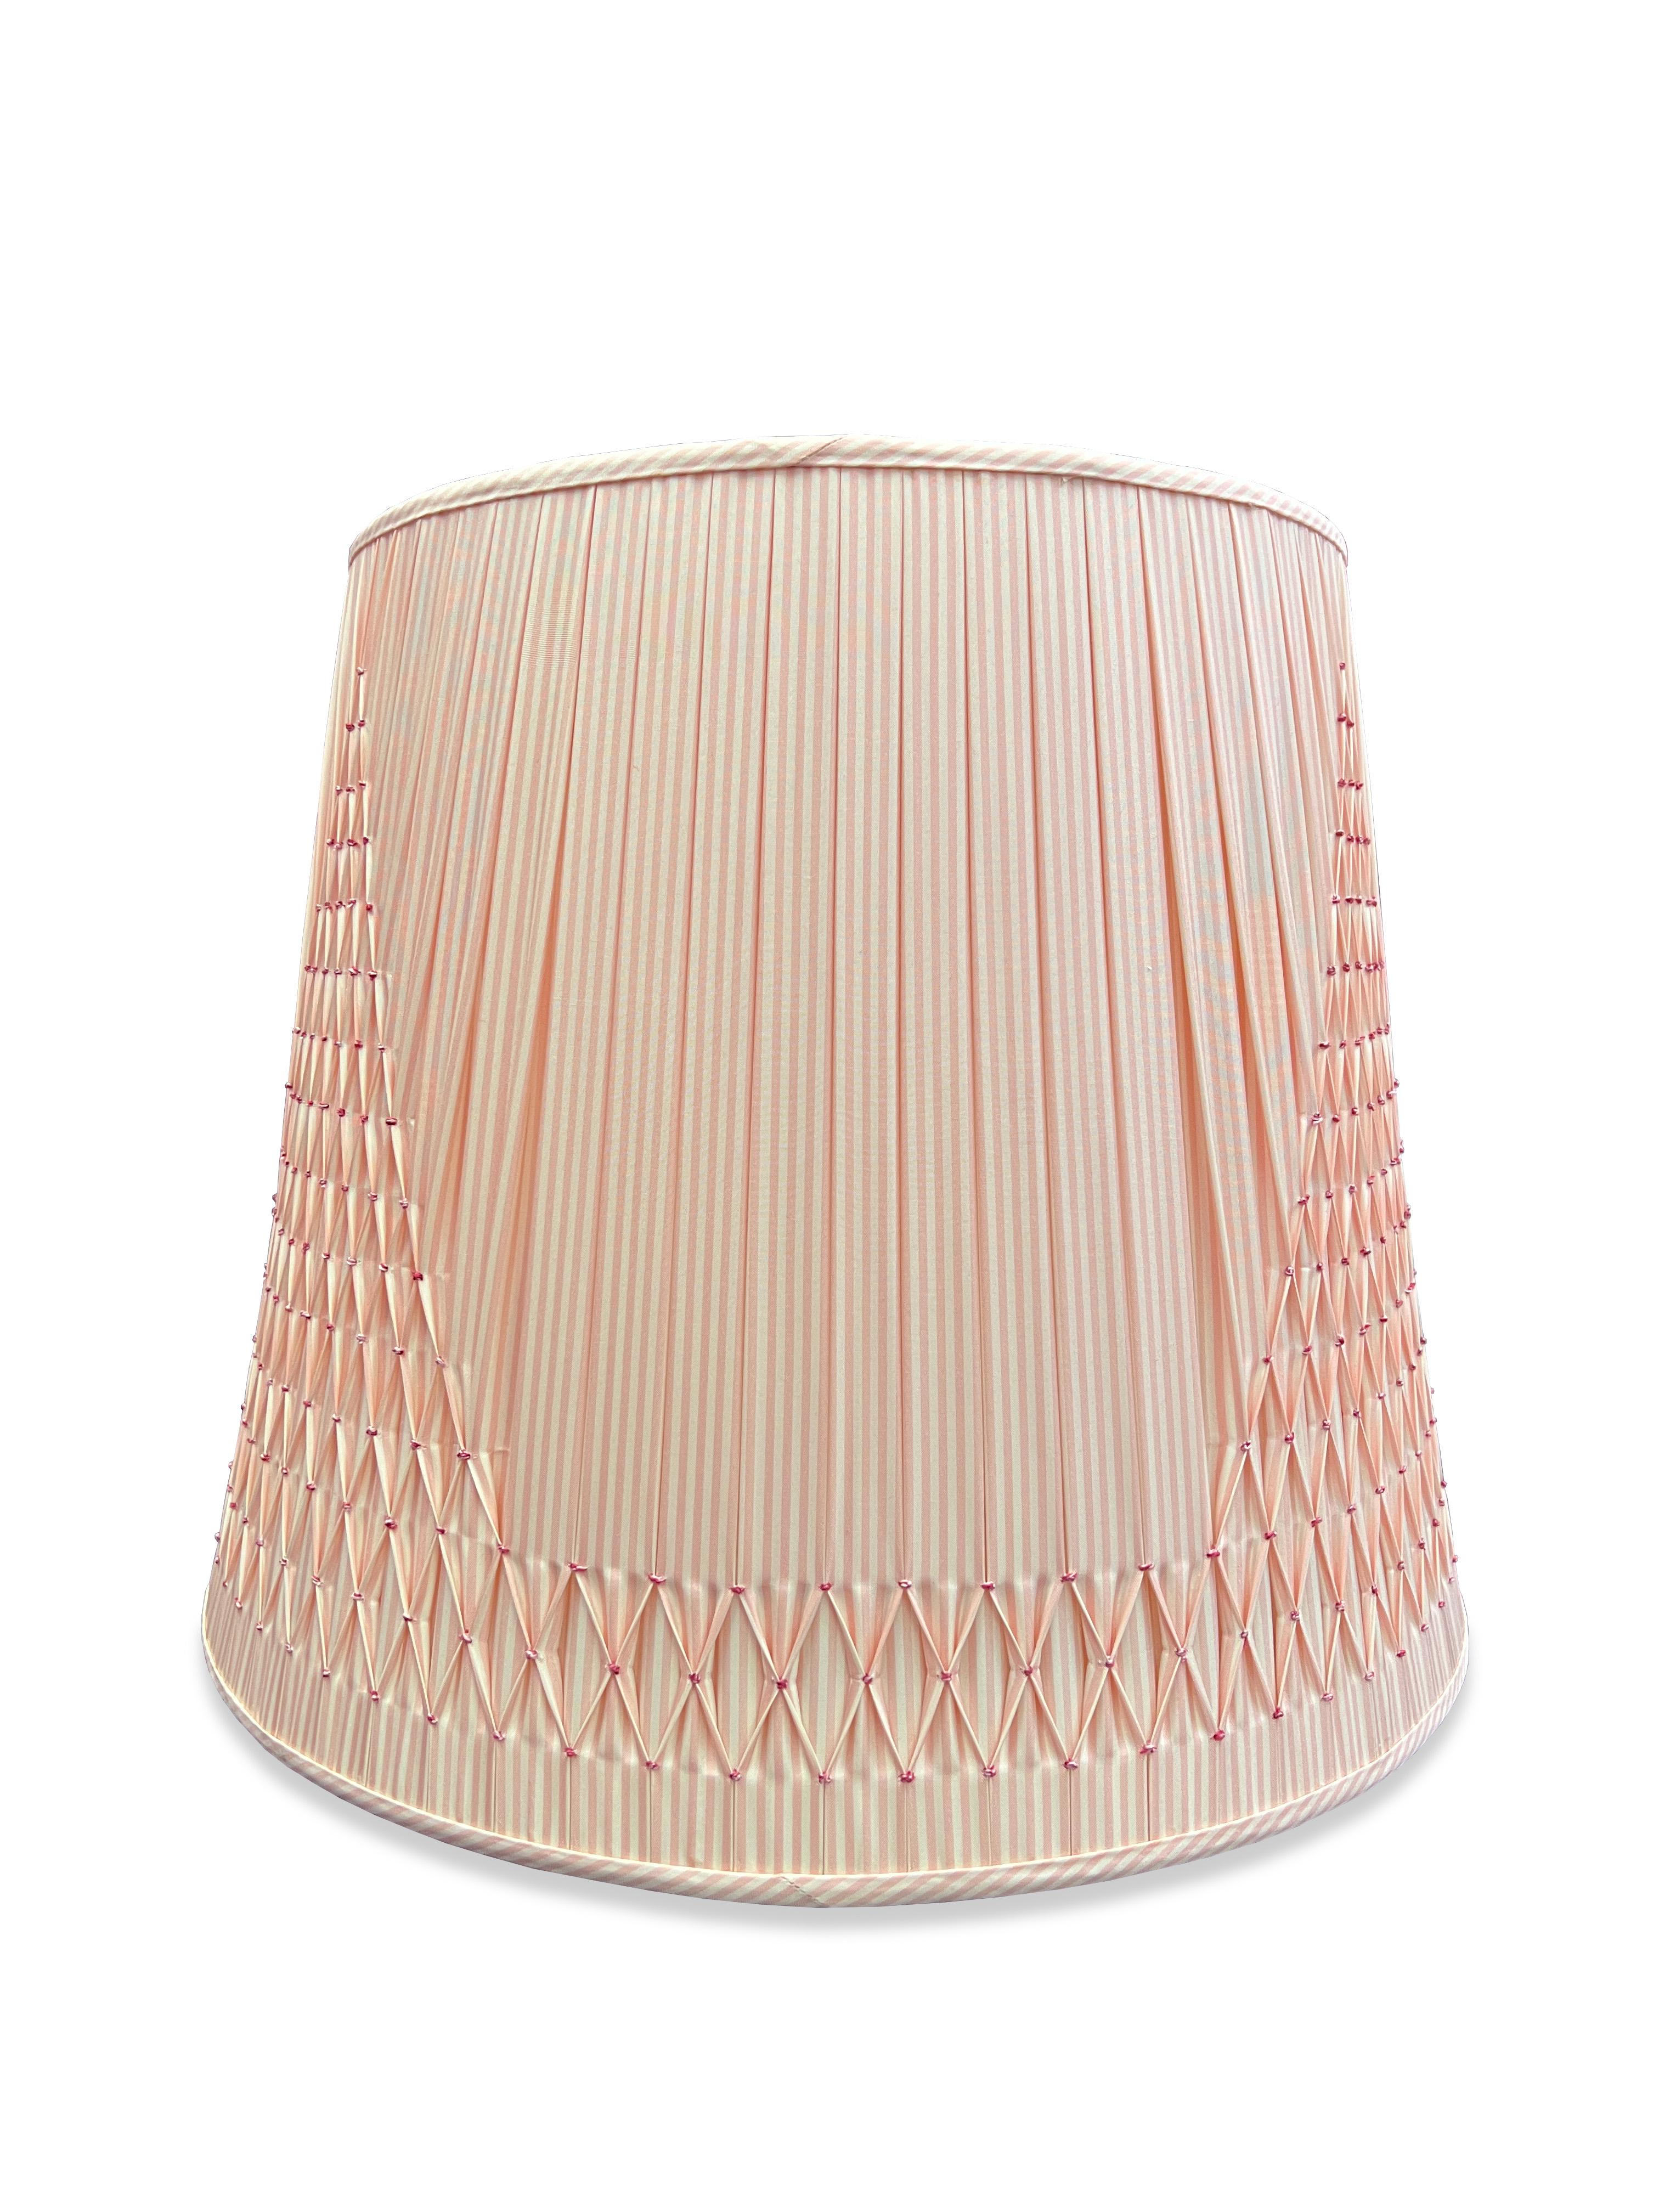 Gorgeous handmade pink stripped pleated lamp shade with diamond pattern. The perfect shade to enhance any floor or table lamp. 
Height: 13.25